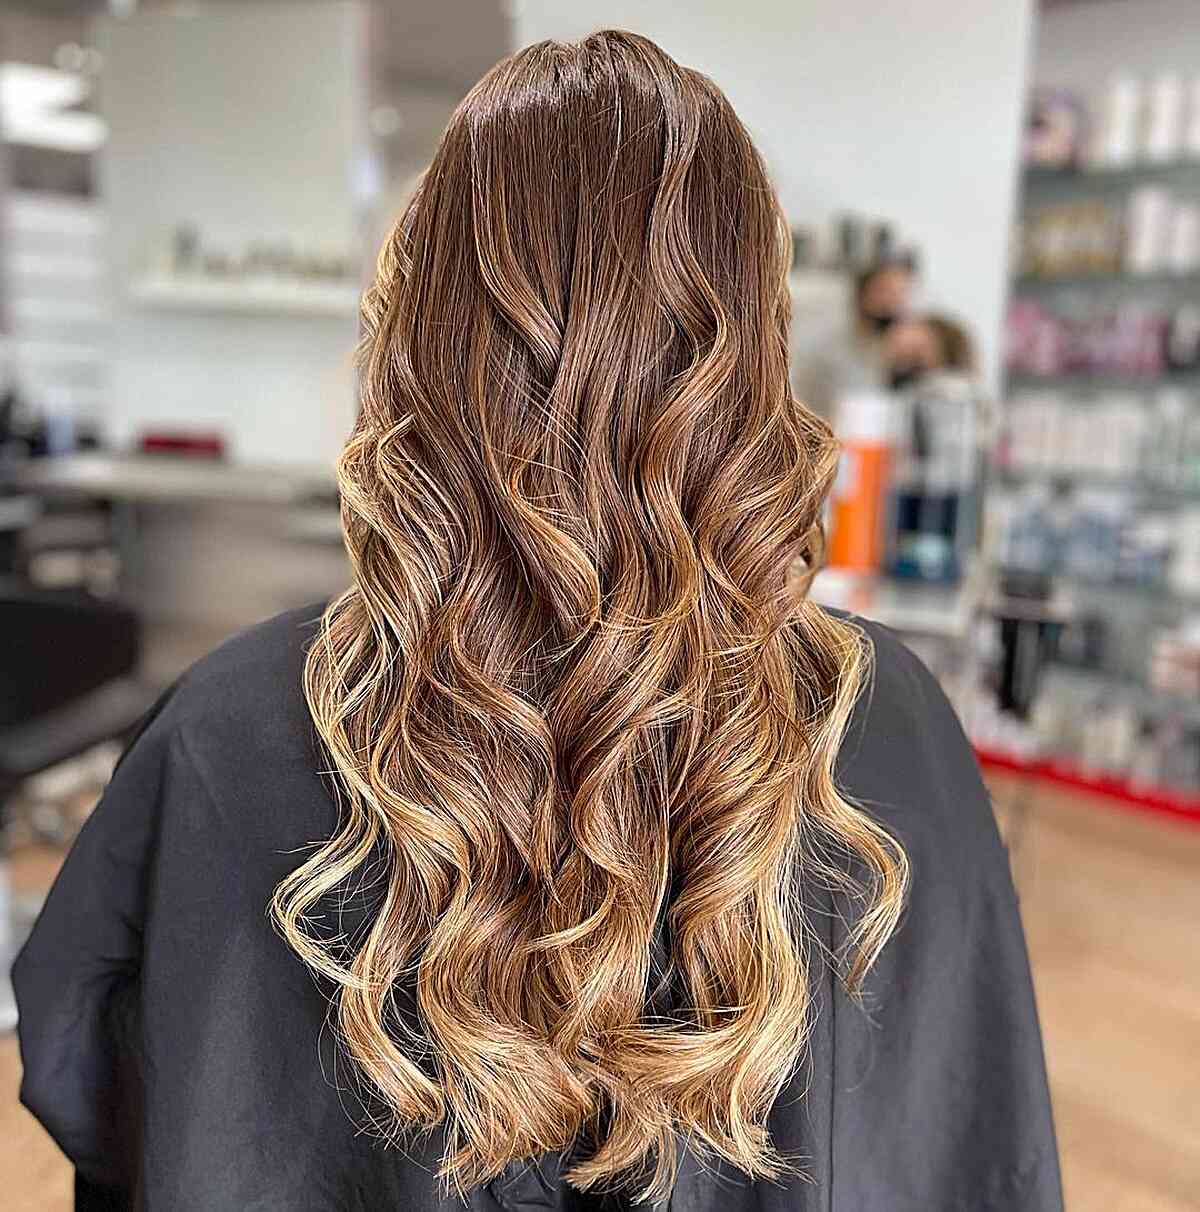 26 Gorgeous Brown and Blonde Balayage Hair Ideas for a Sun-Kissed Hue